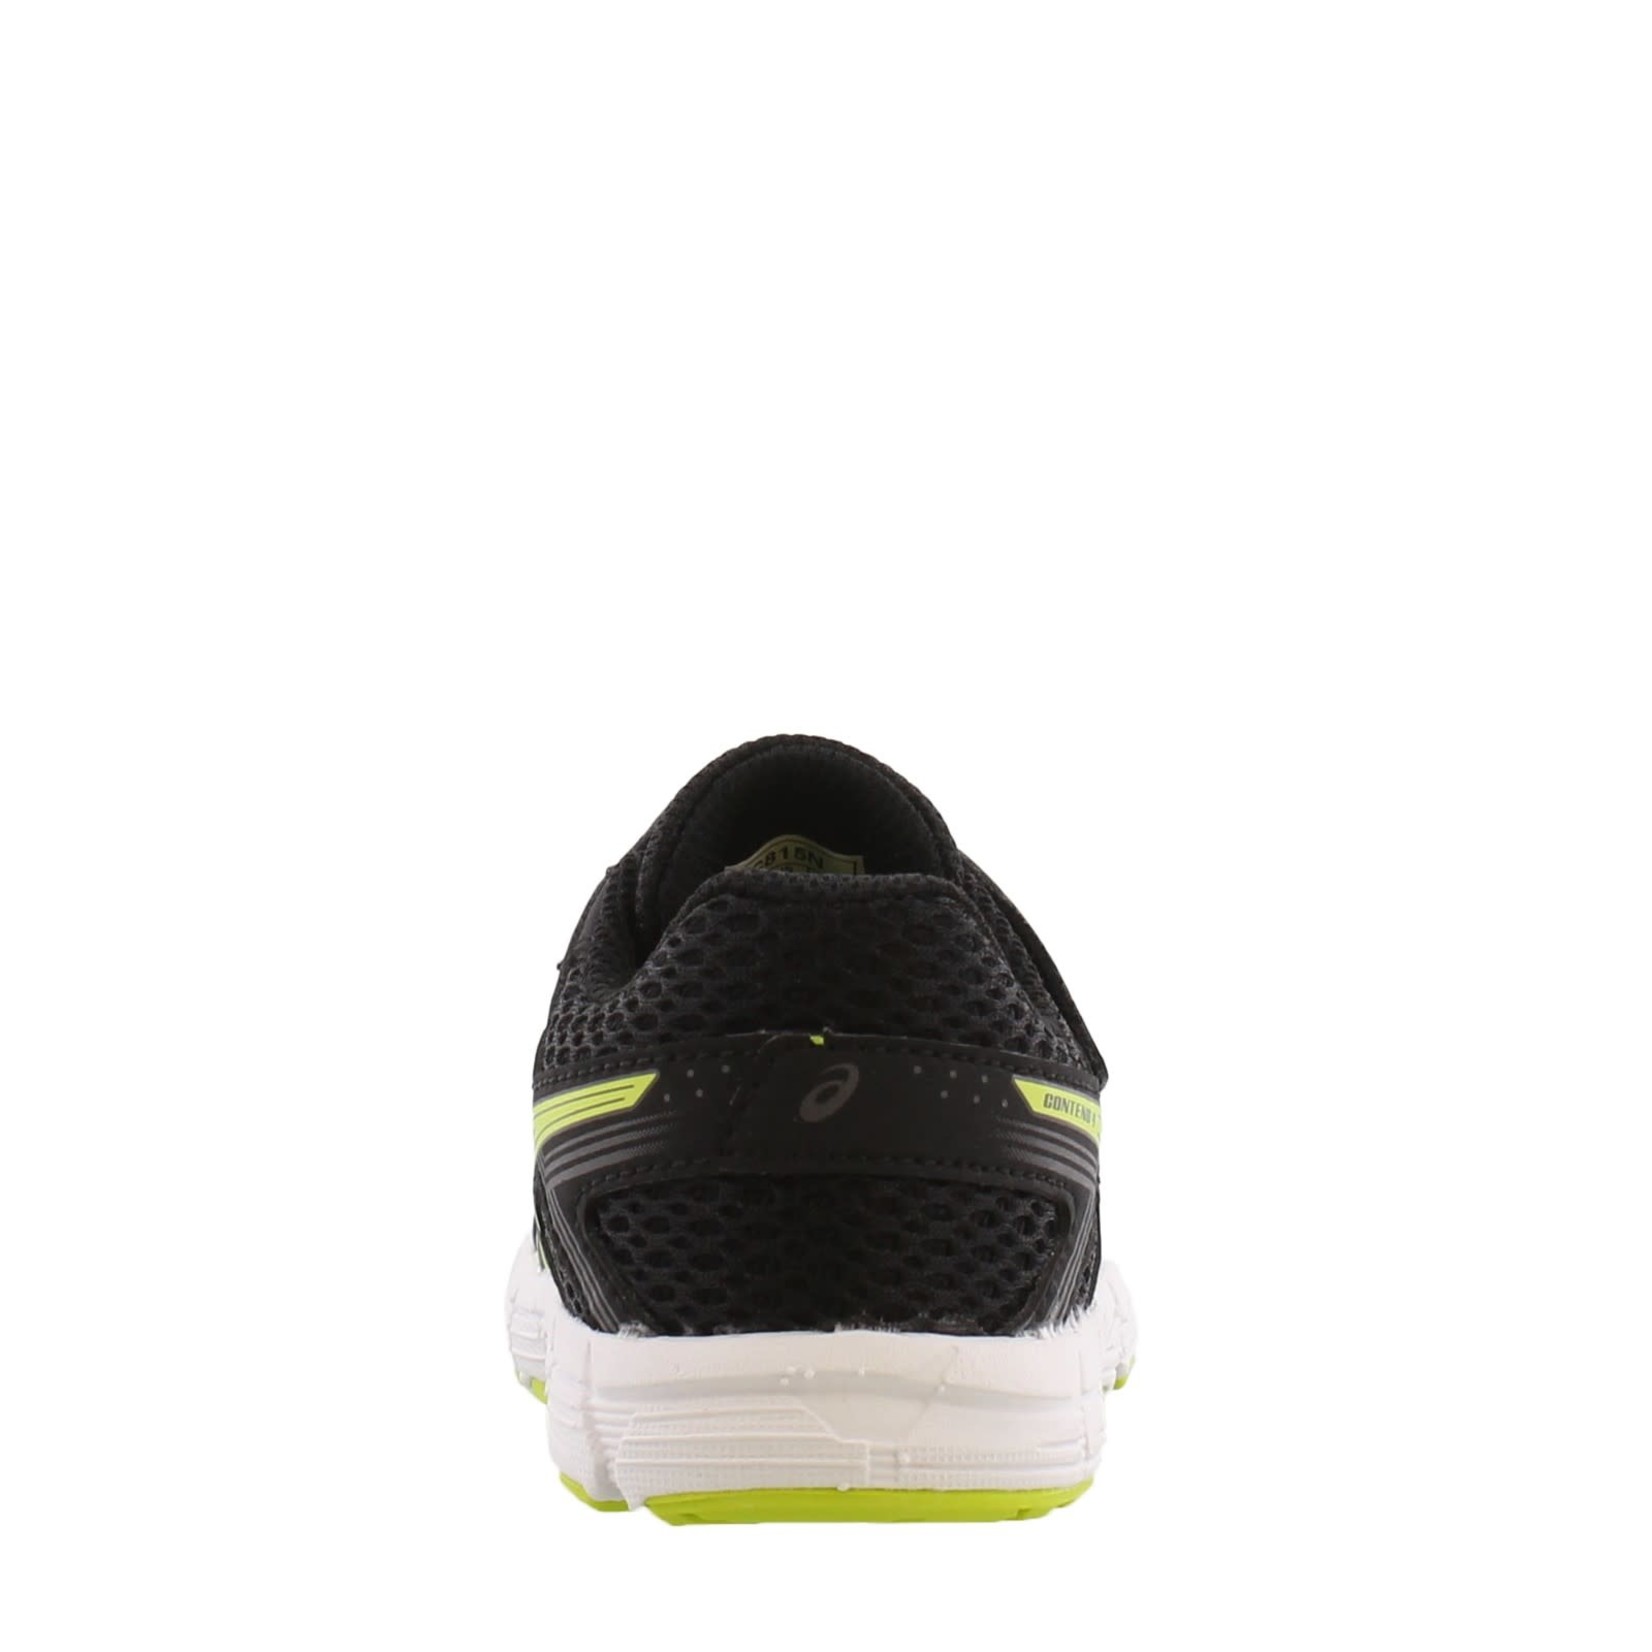 Asics ASICS - Running Shoes 'Contend 4 TS - Black/Neon Lime'